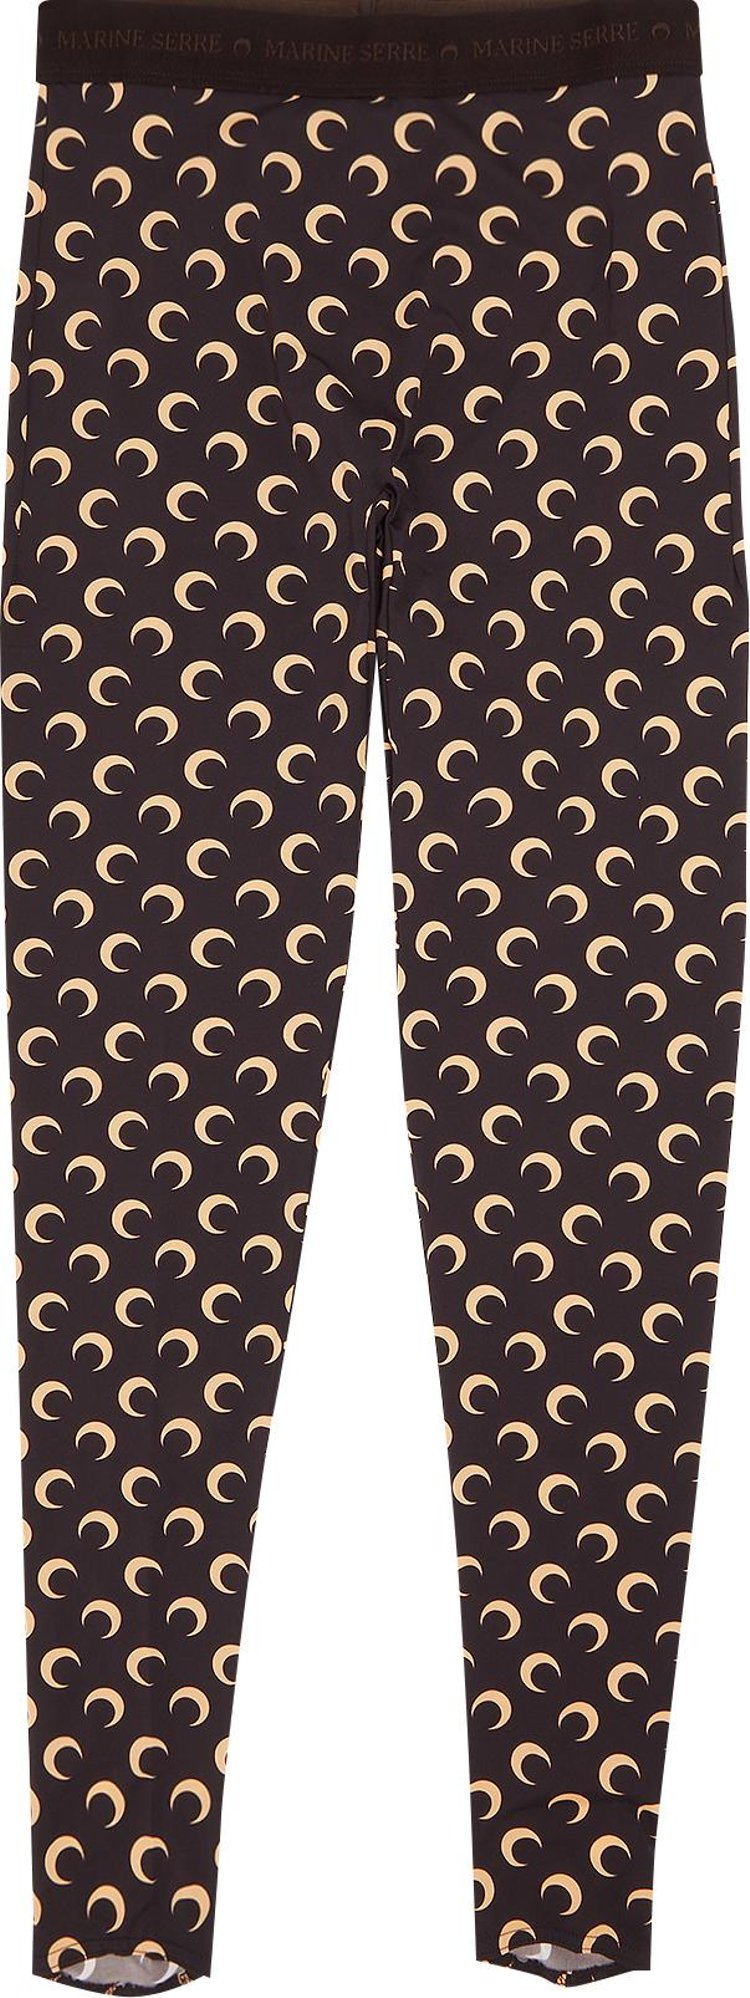 Second Skin All Over Moon Leggings Brown